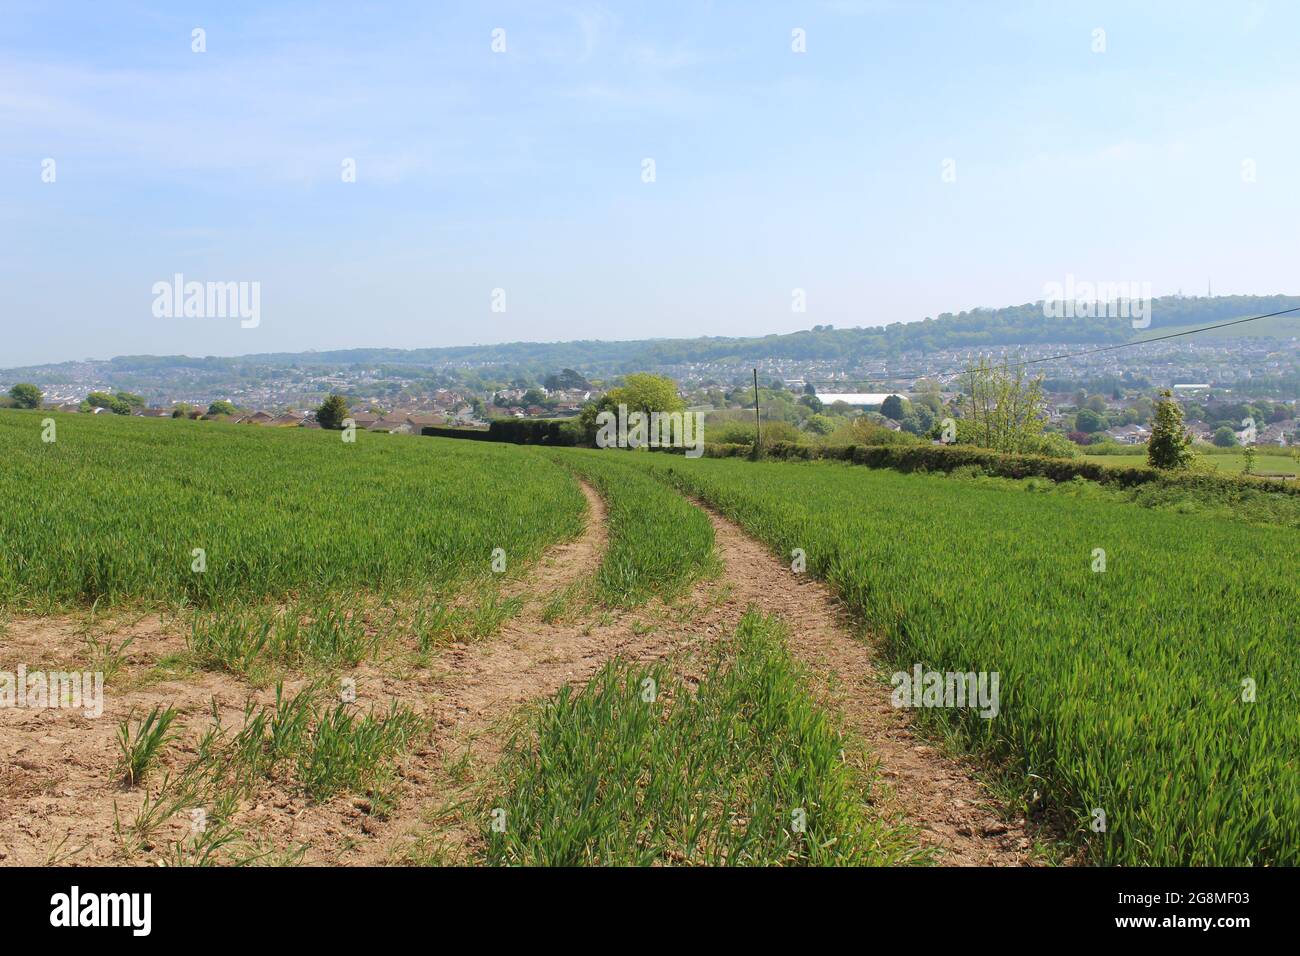 landscapes of farmland grass and crops with pleasant views Stock Photo